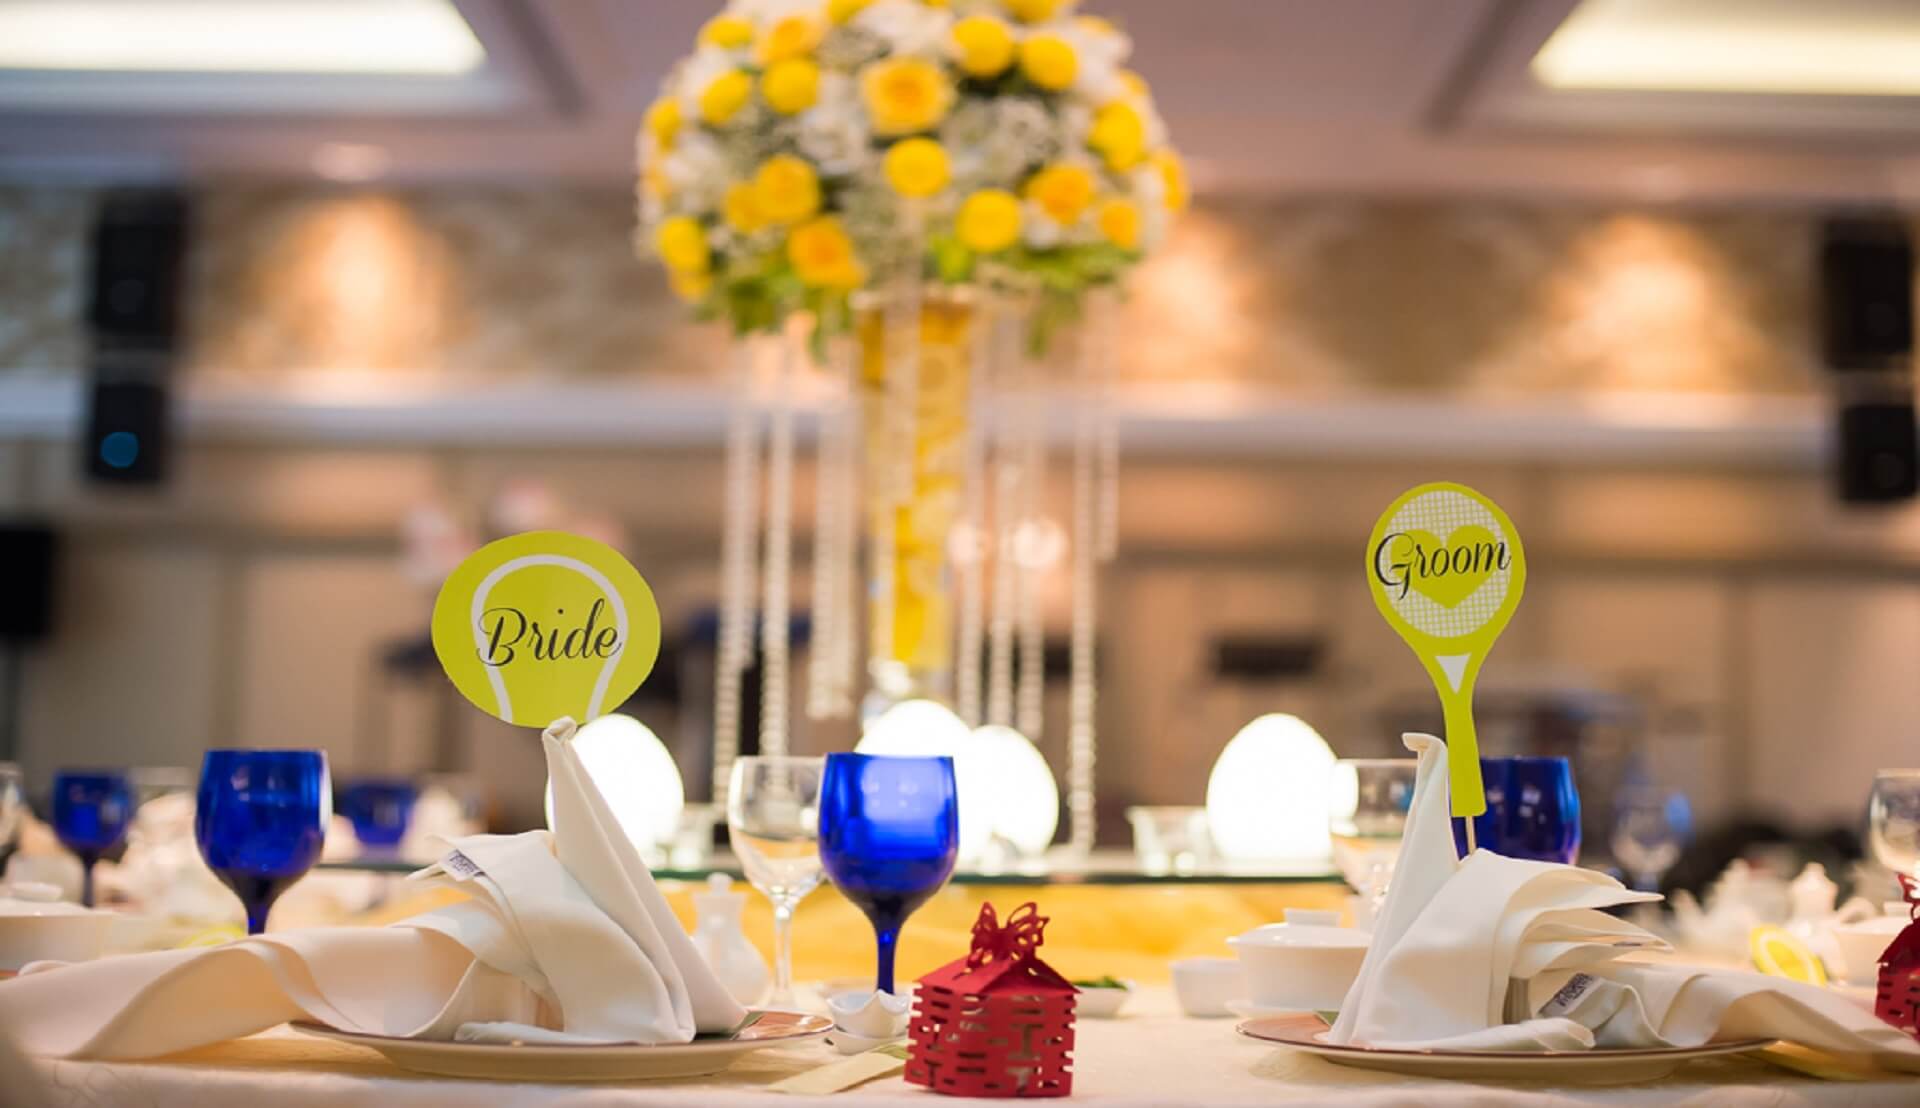 Sugar & Spice Events - Table decoration at the wedding reception